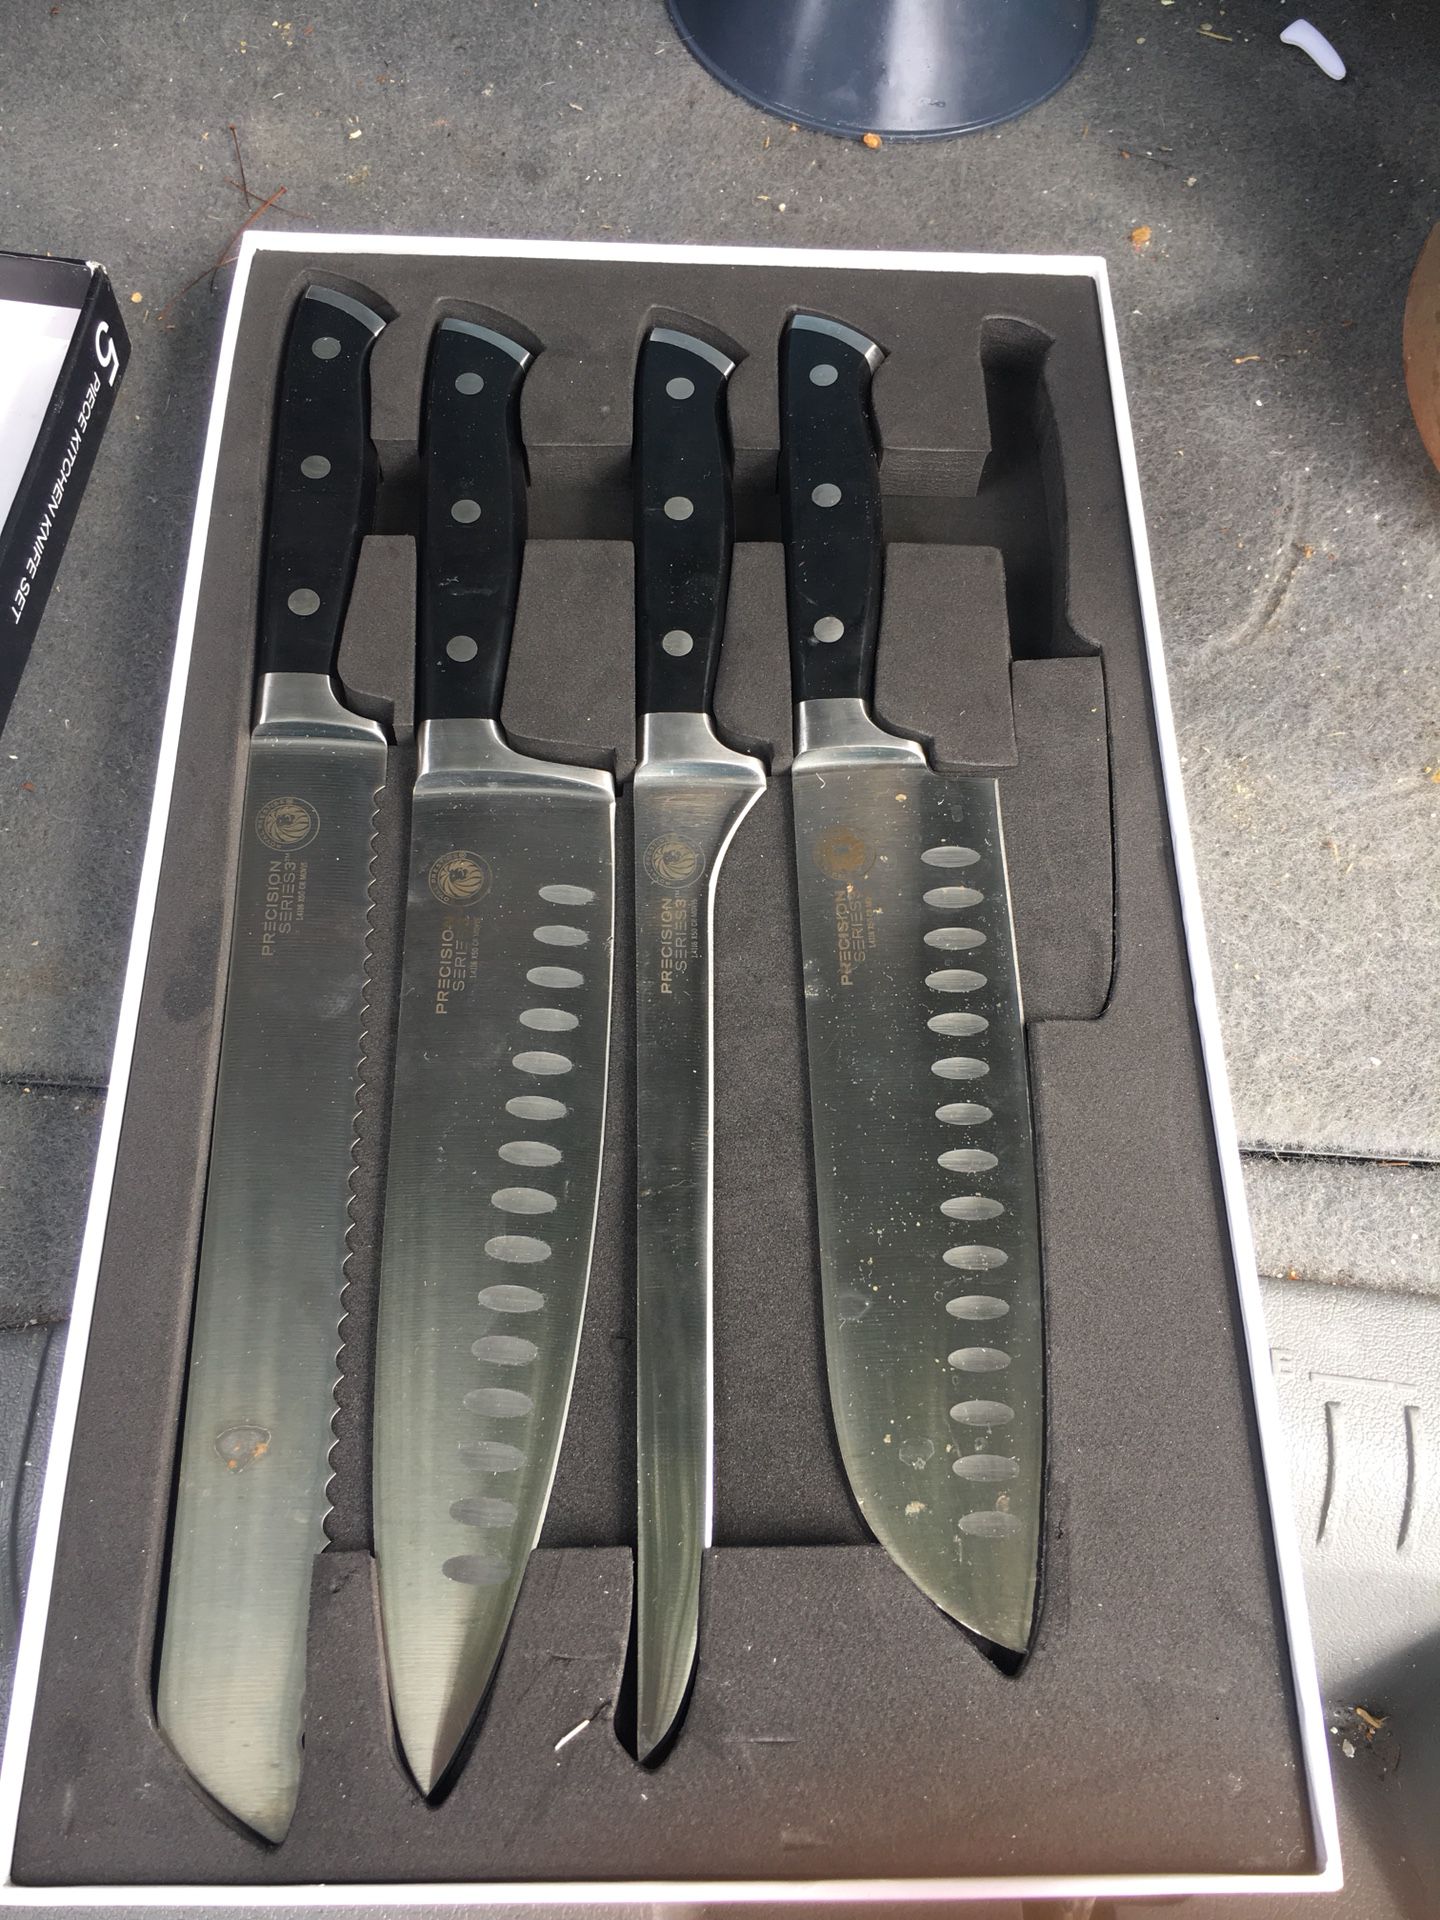 Misen Chef Knife - 8 Inch Professional Kitchen Knife - High Carbon Steel  Ultra for Sale in Houston, TX - OfferUp